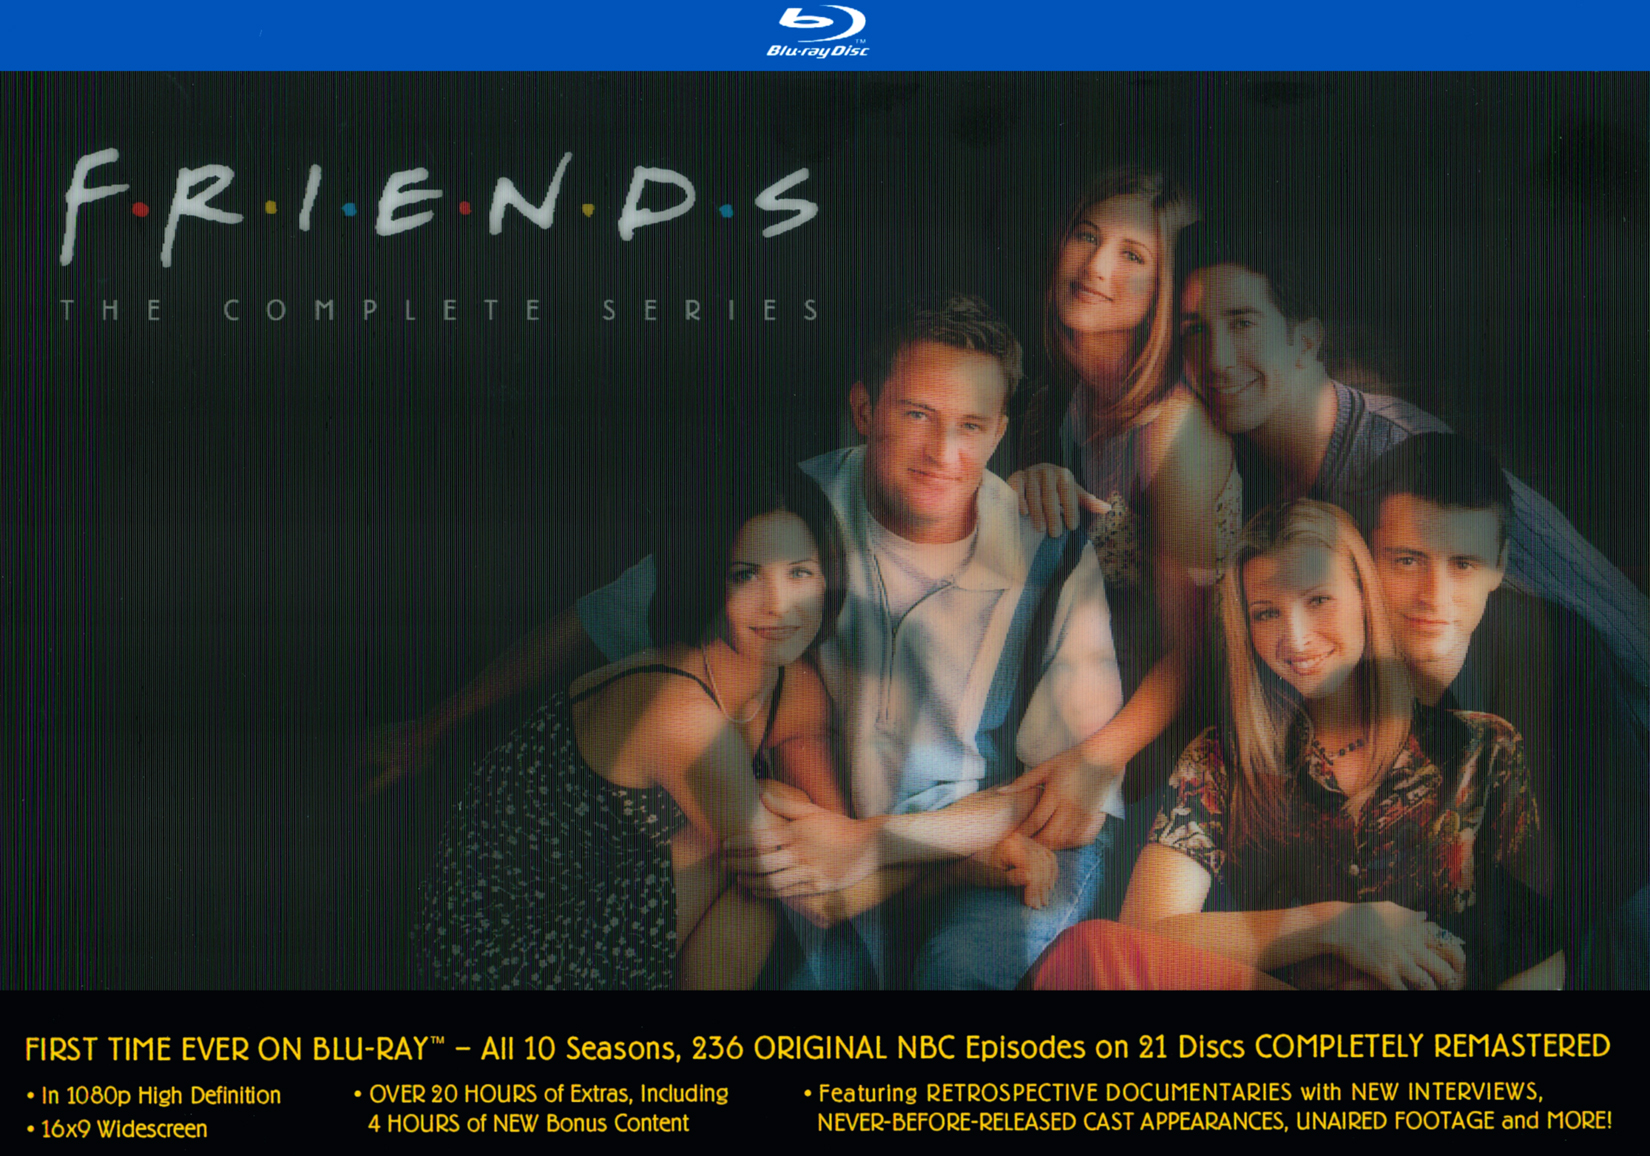 Friends Complete Series Digital Copy Only $9.99 (Regularly $140)